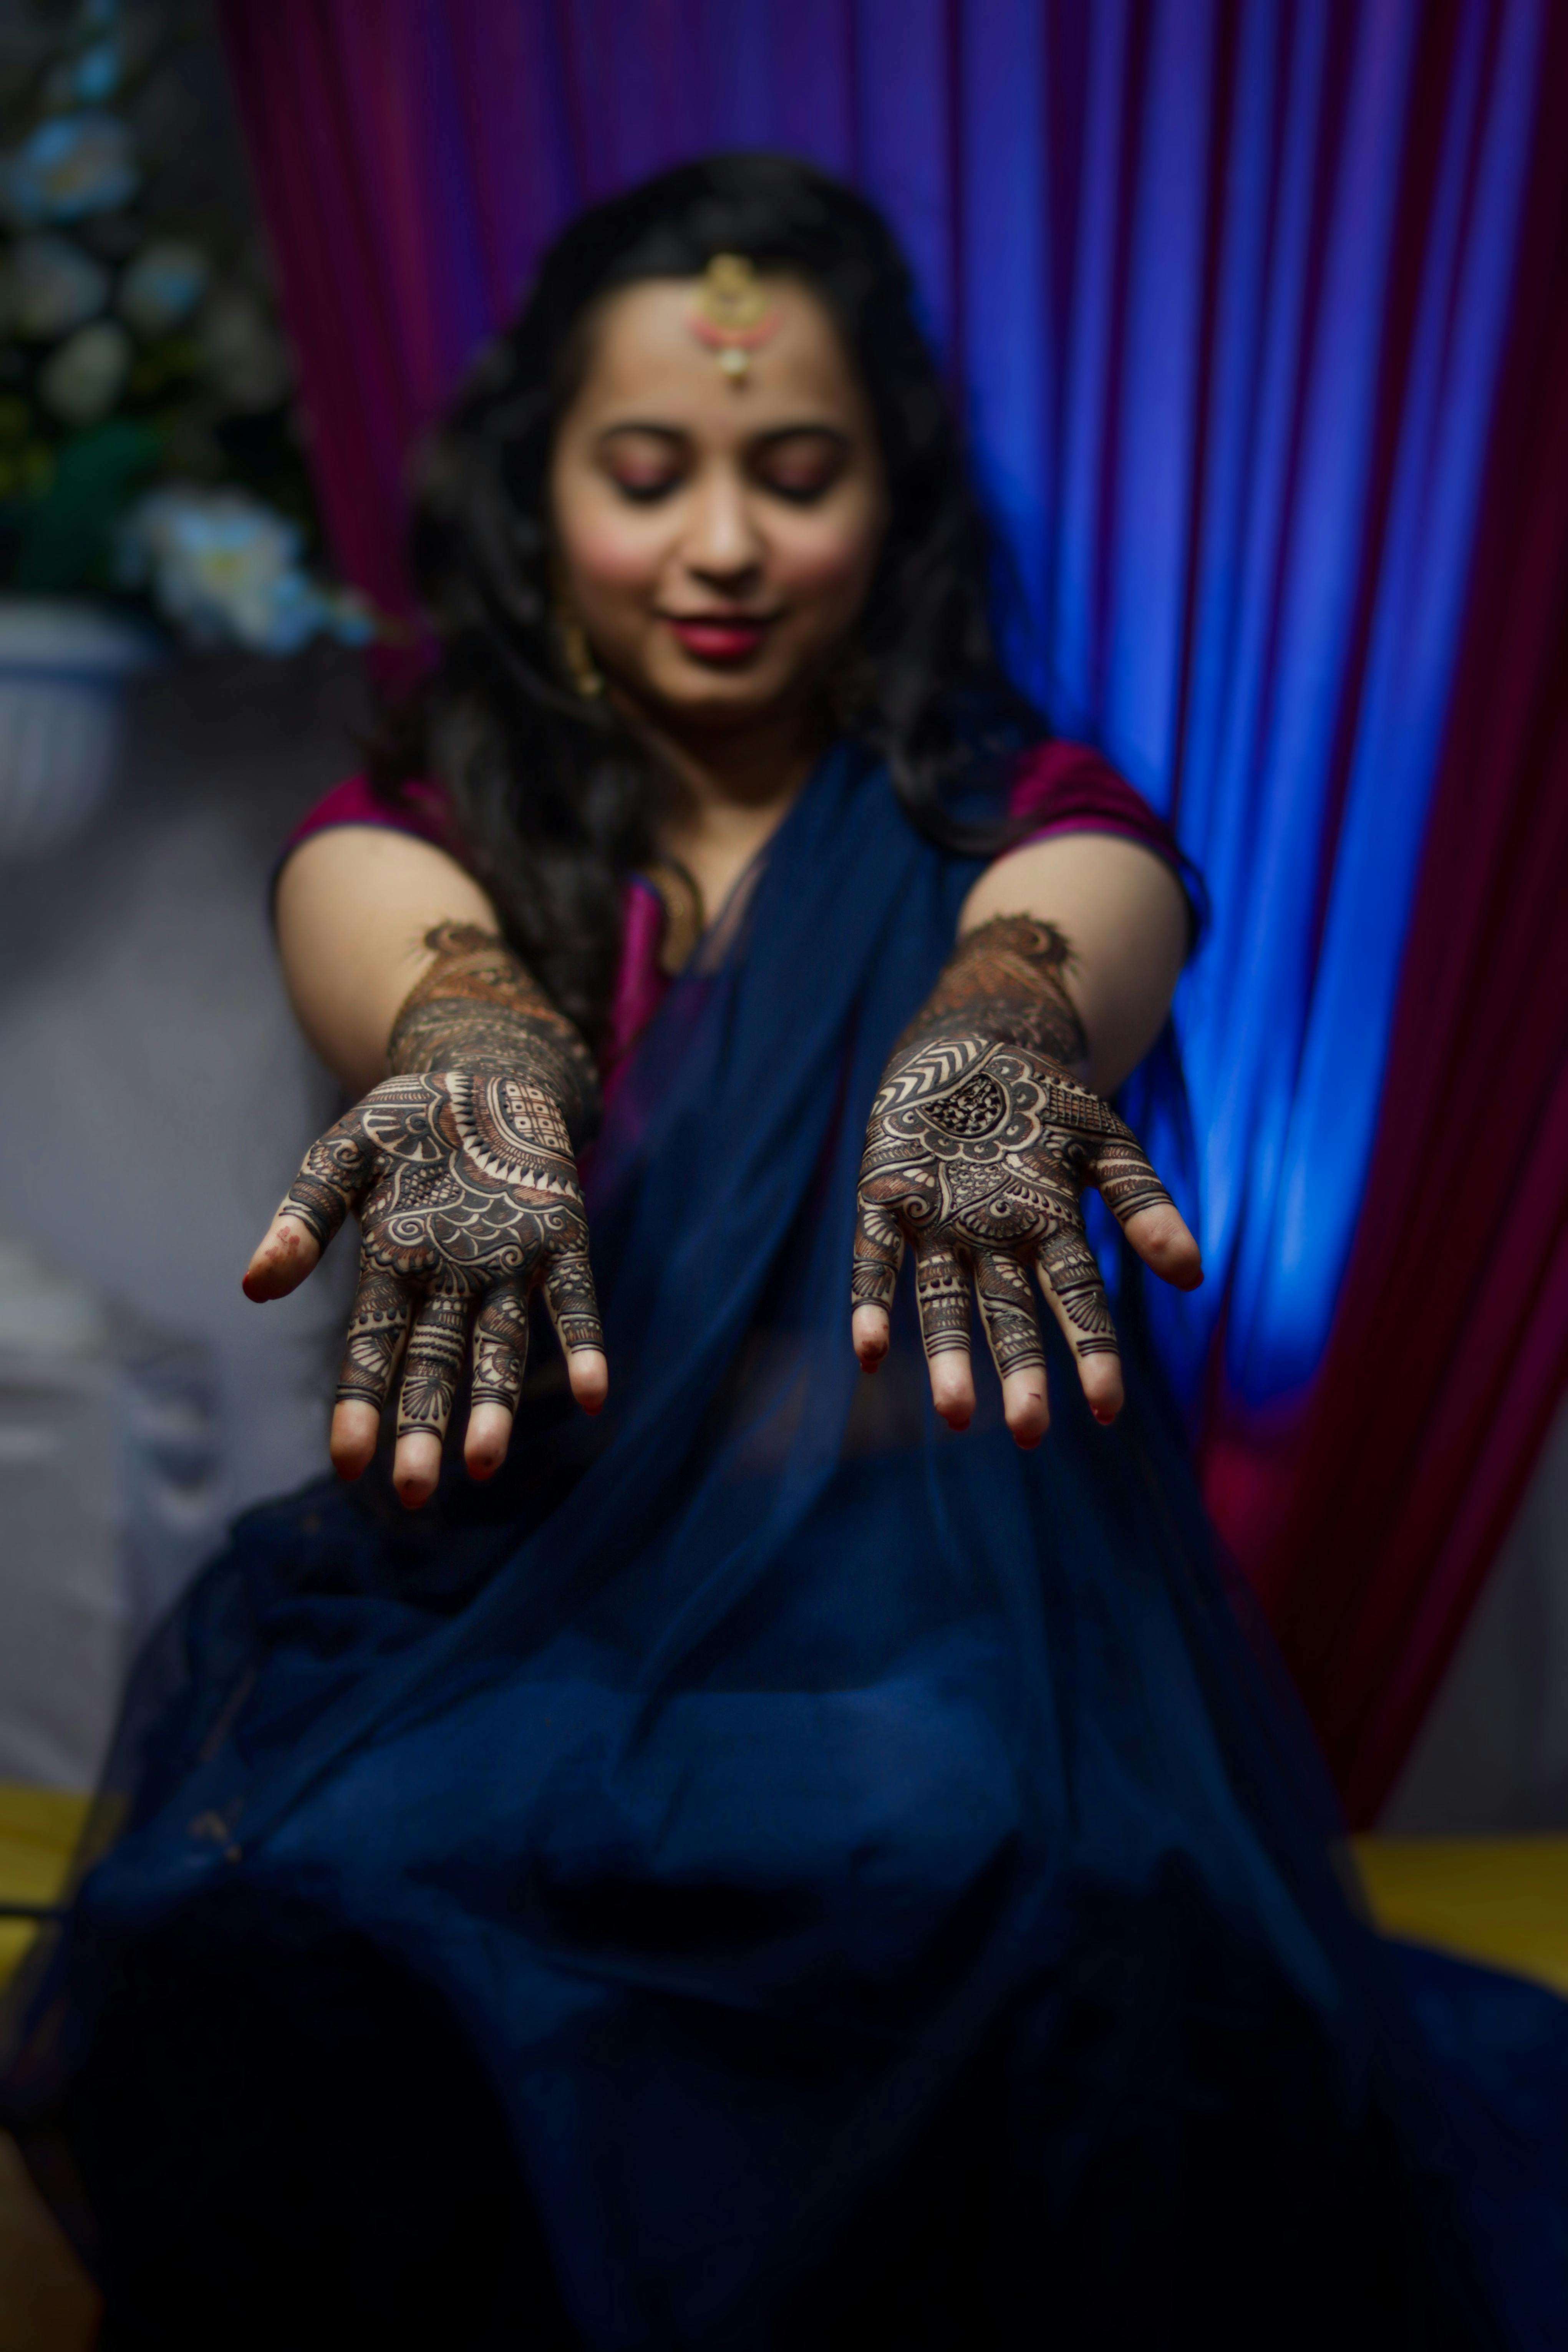 Bright Colors and Lots of Love in this Traditional Hindu Wedding